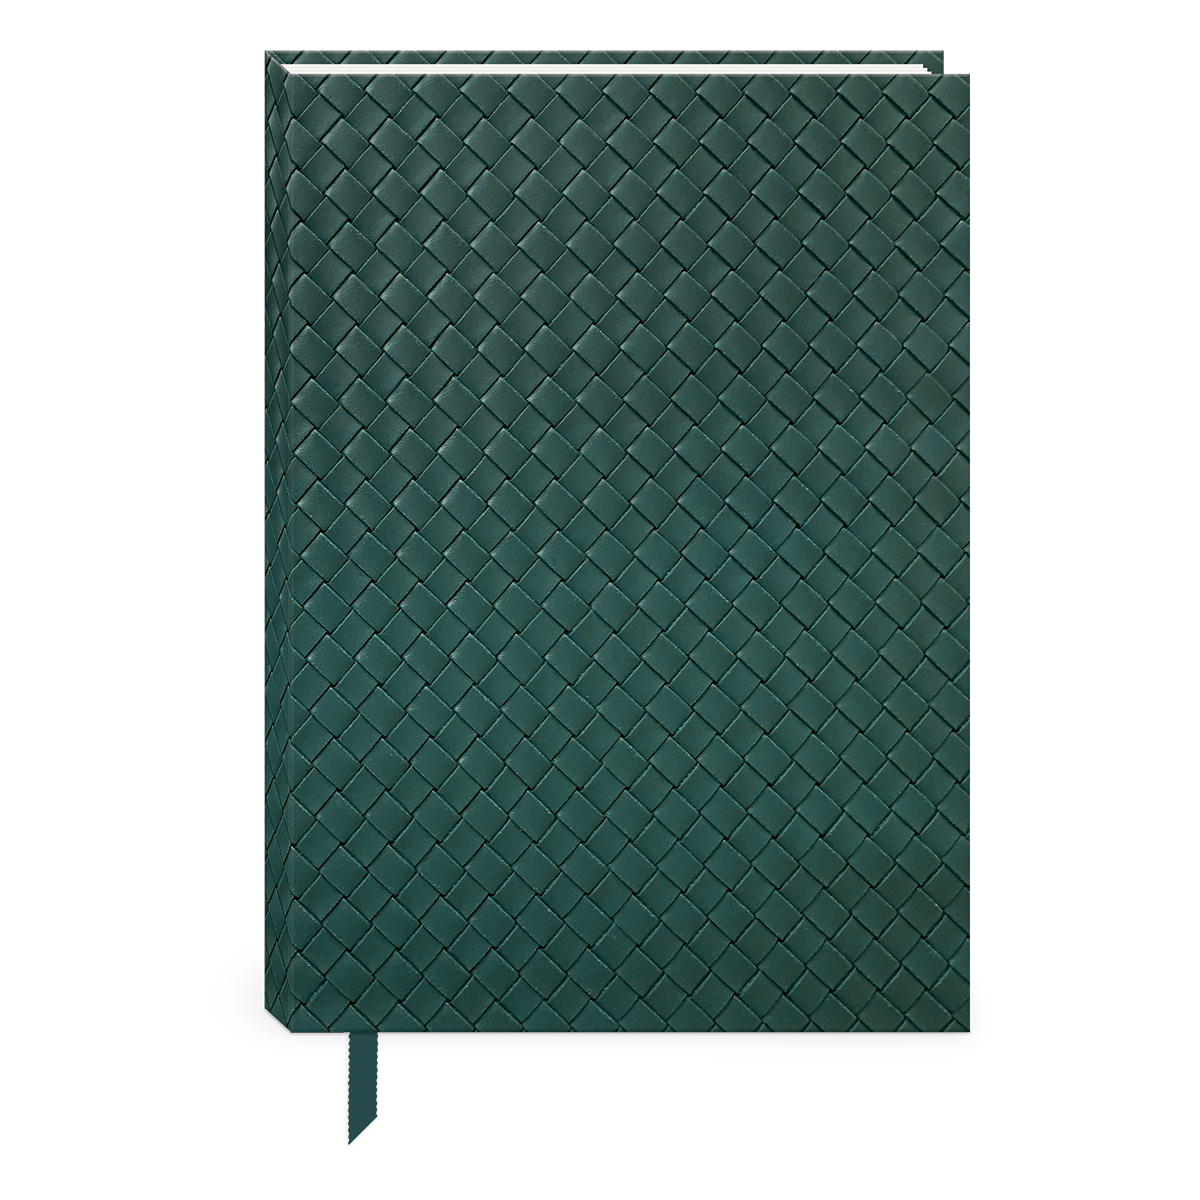 Mixed Media Teal Weave Hardcover Journal Product